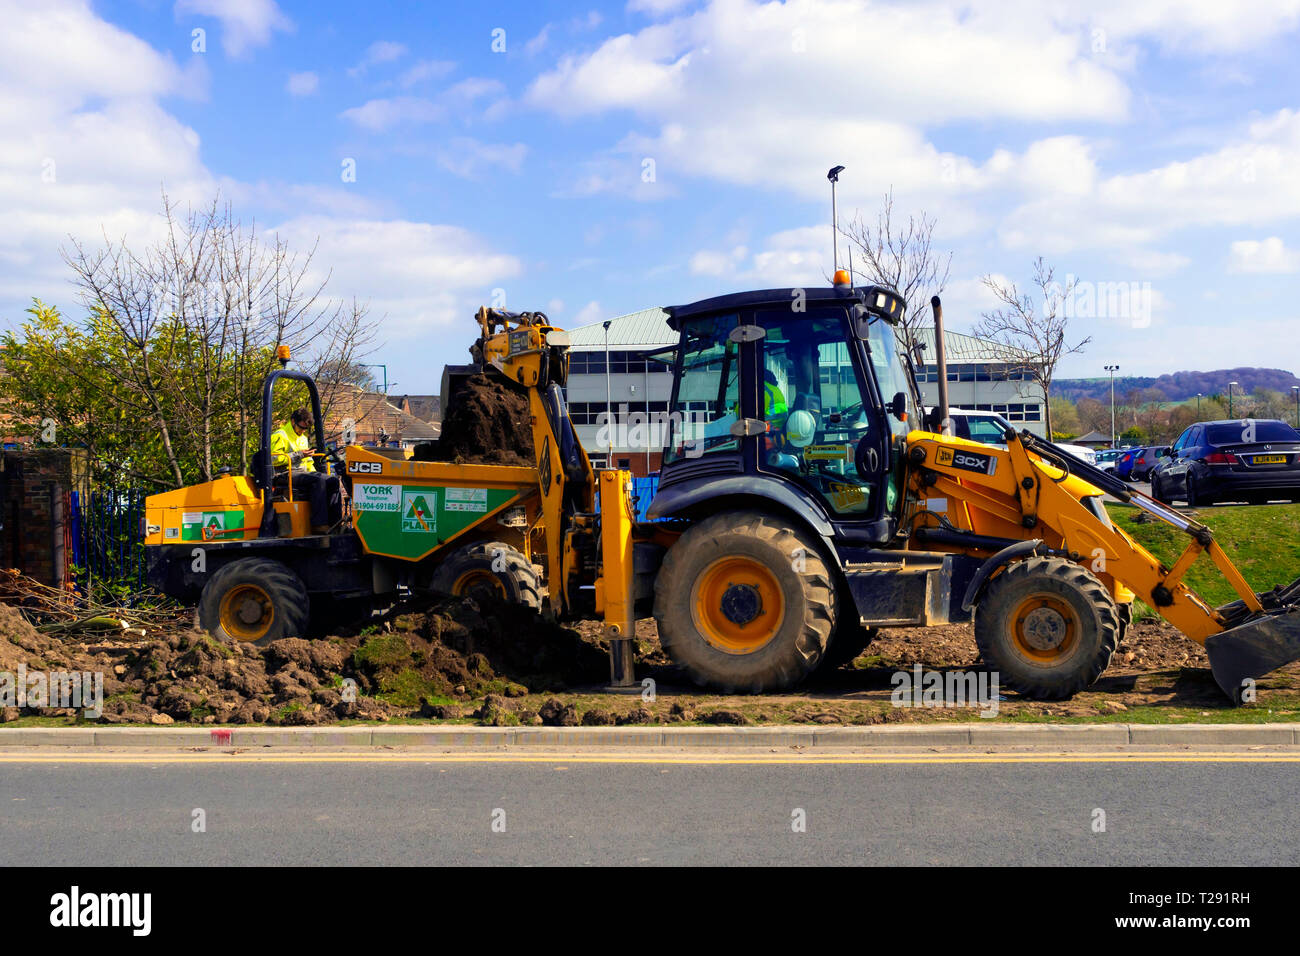 Workmen using a JCB 3CX excavator loading excavated topsoil into a dumper truck for removal Stock Photo